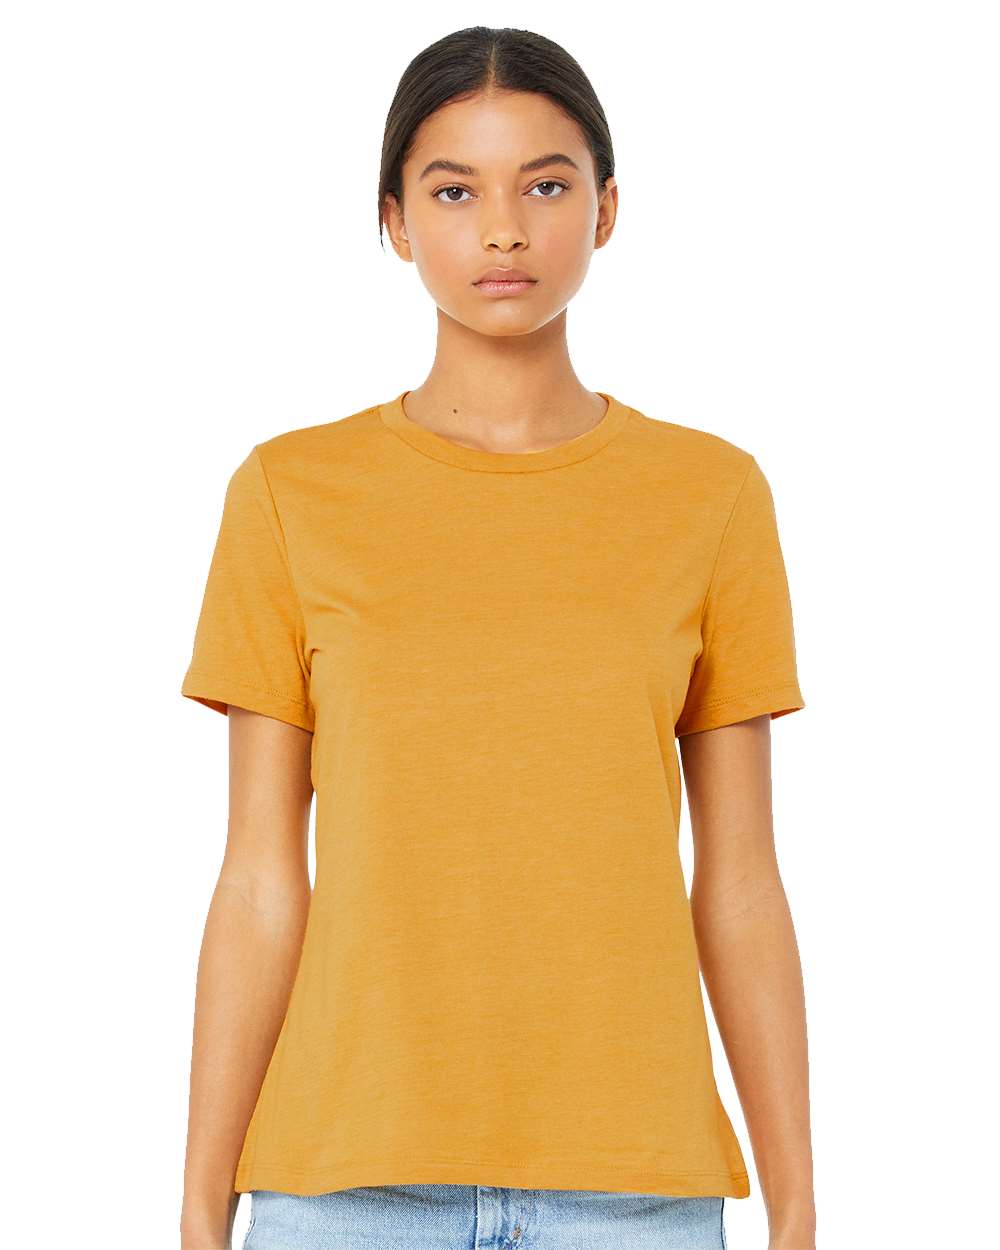 Bella + Canvas Women's Relaxed Tee